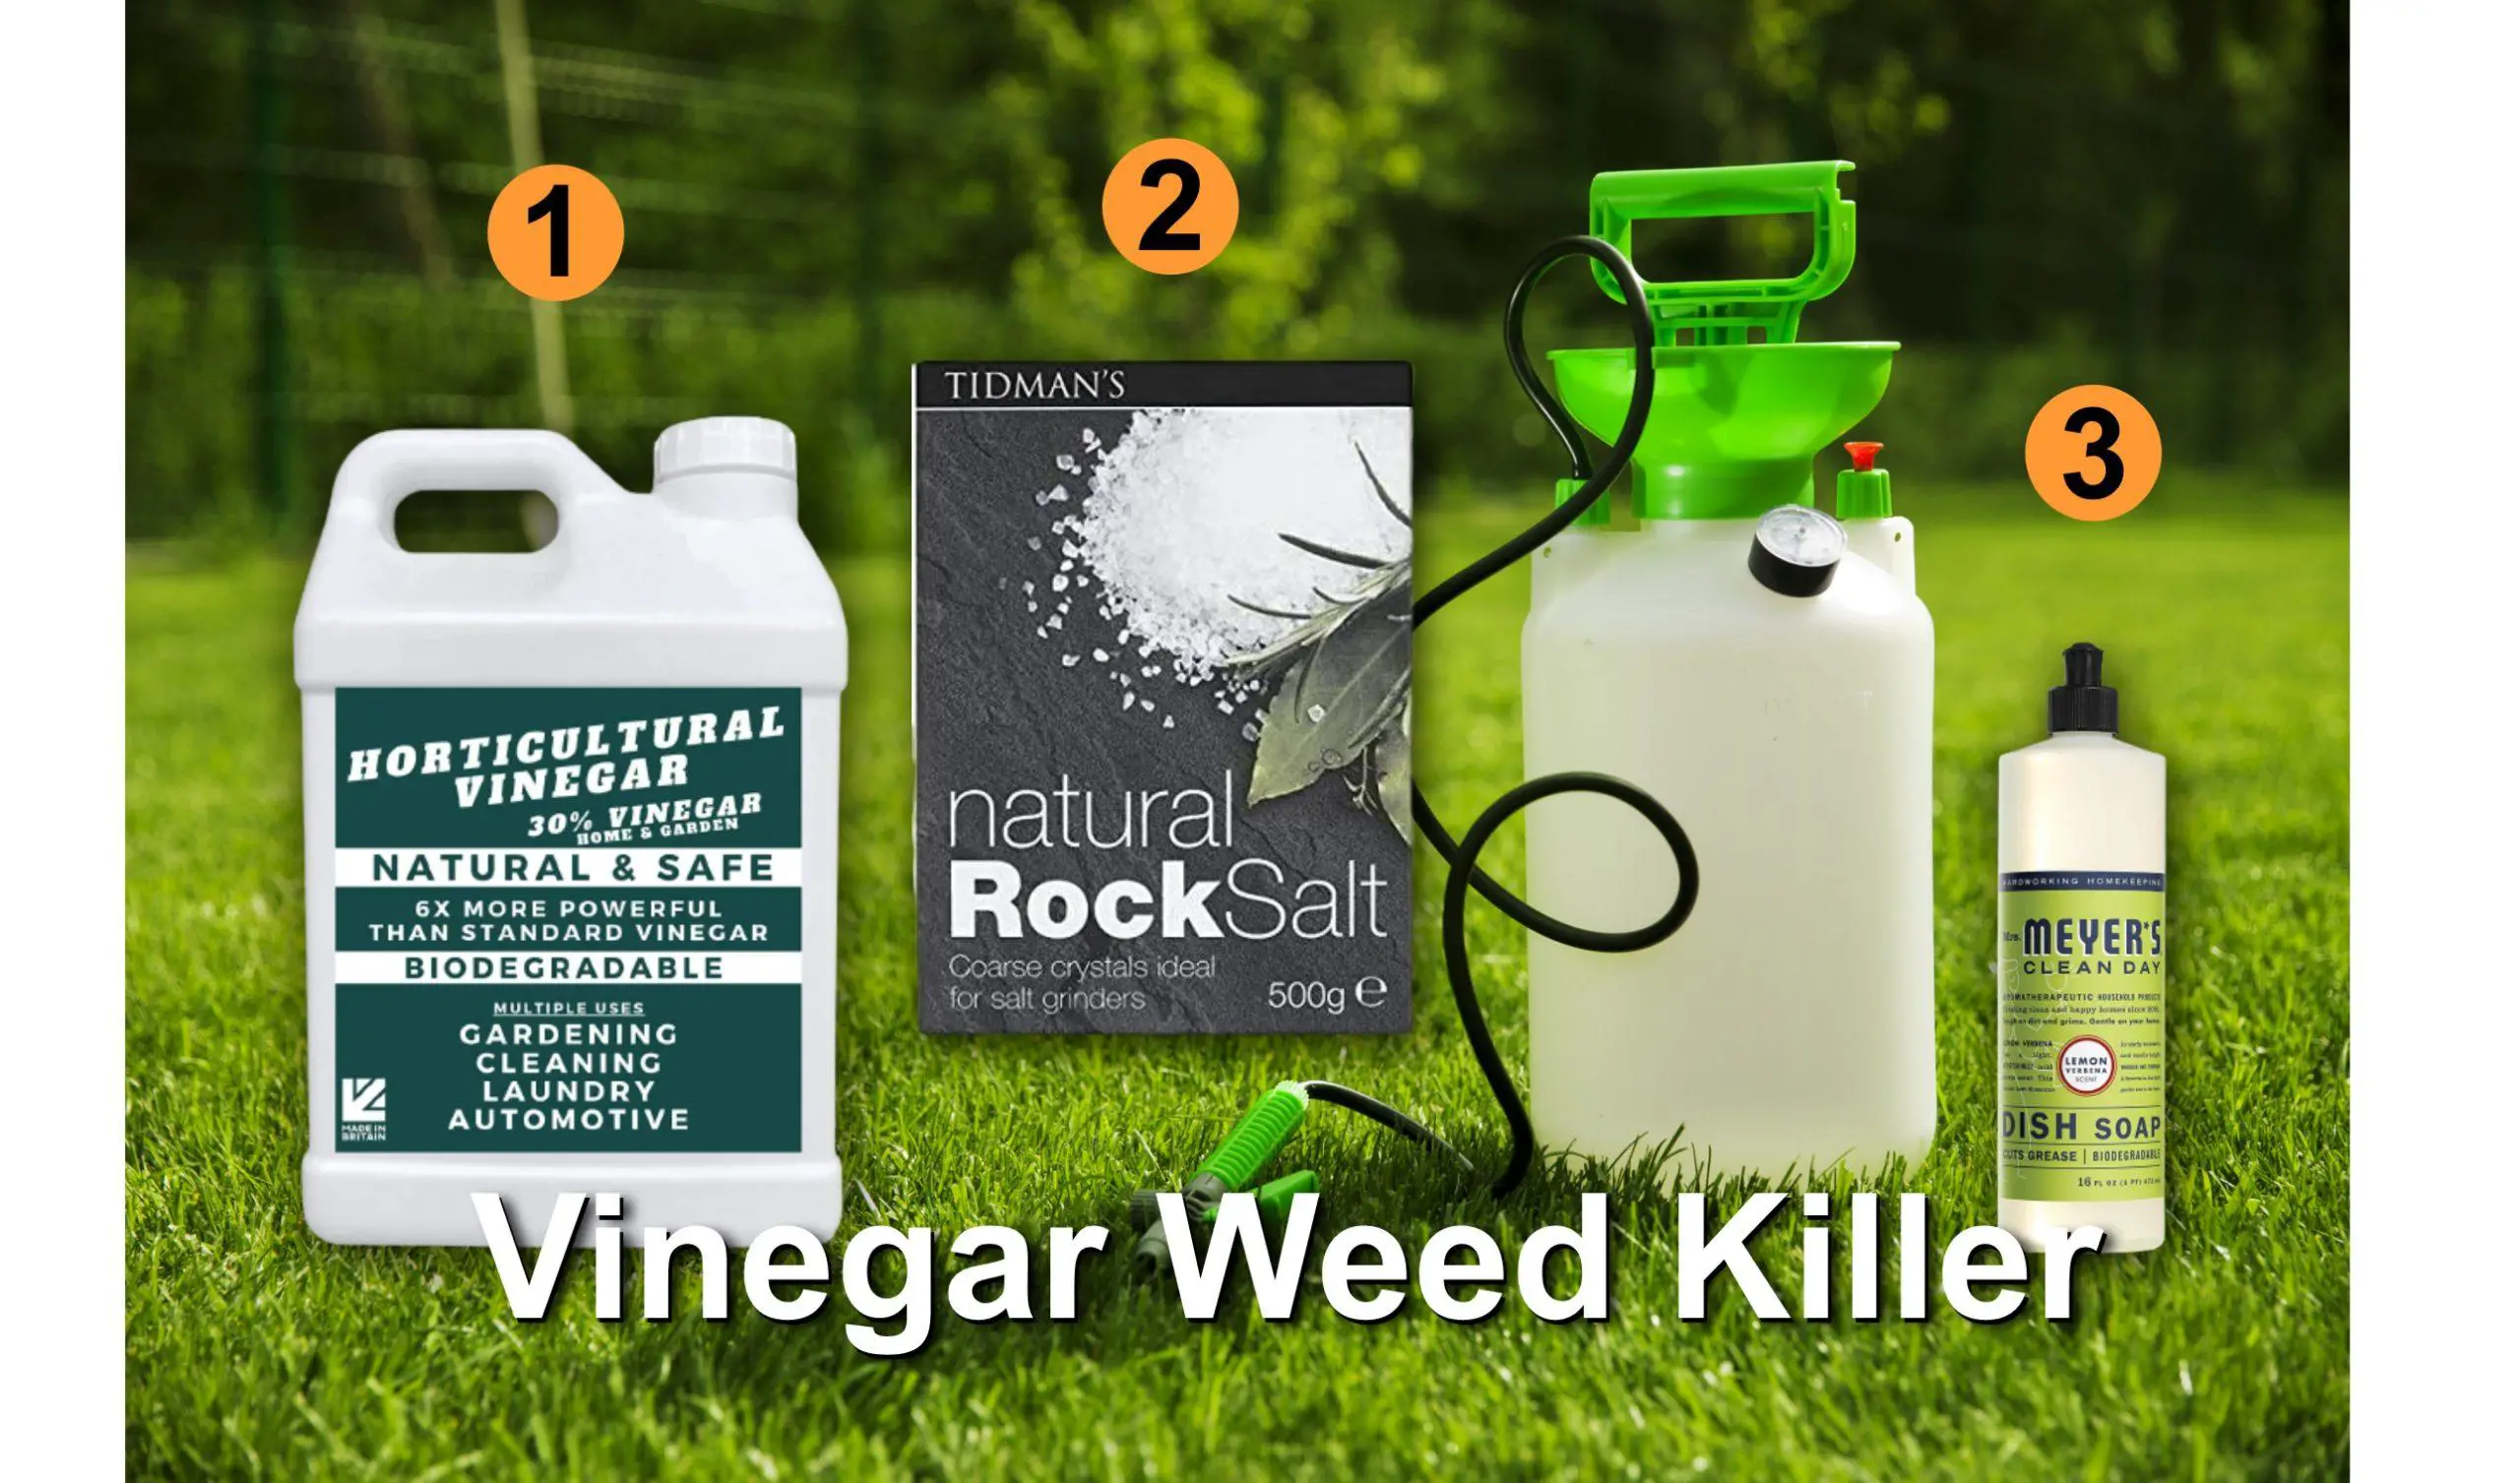 Vinegar weed killer recipe - how its made and applied